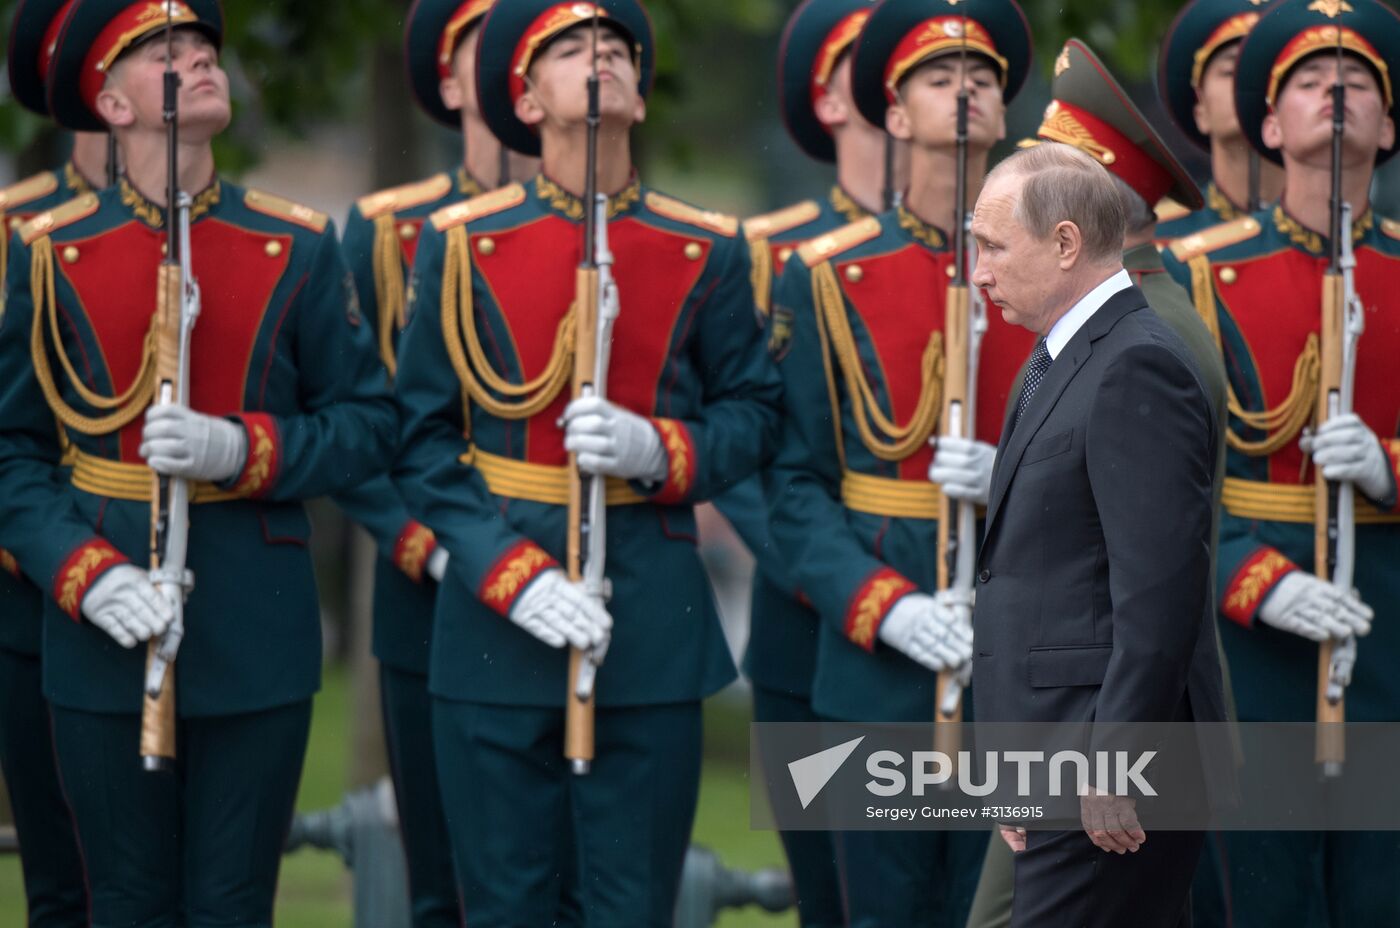 Russian President Vladimir Putin and Prime Minister Dmitry Medvedev lay wreaths at Tomb of the Unknown Soldier